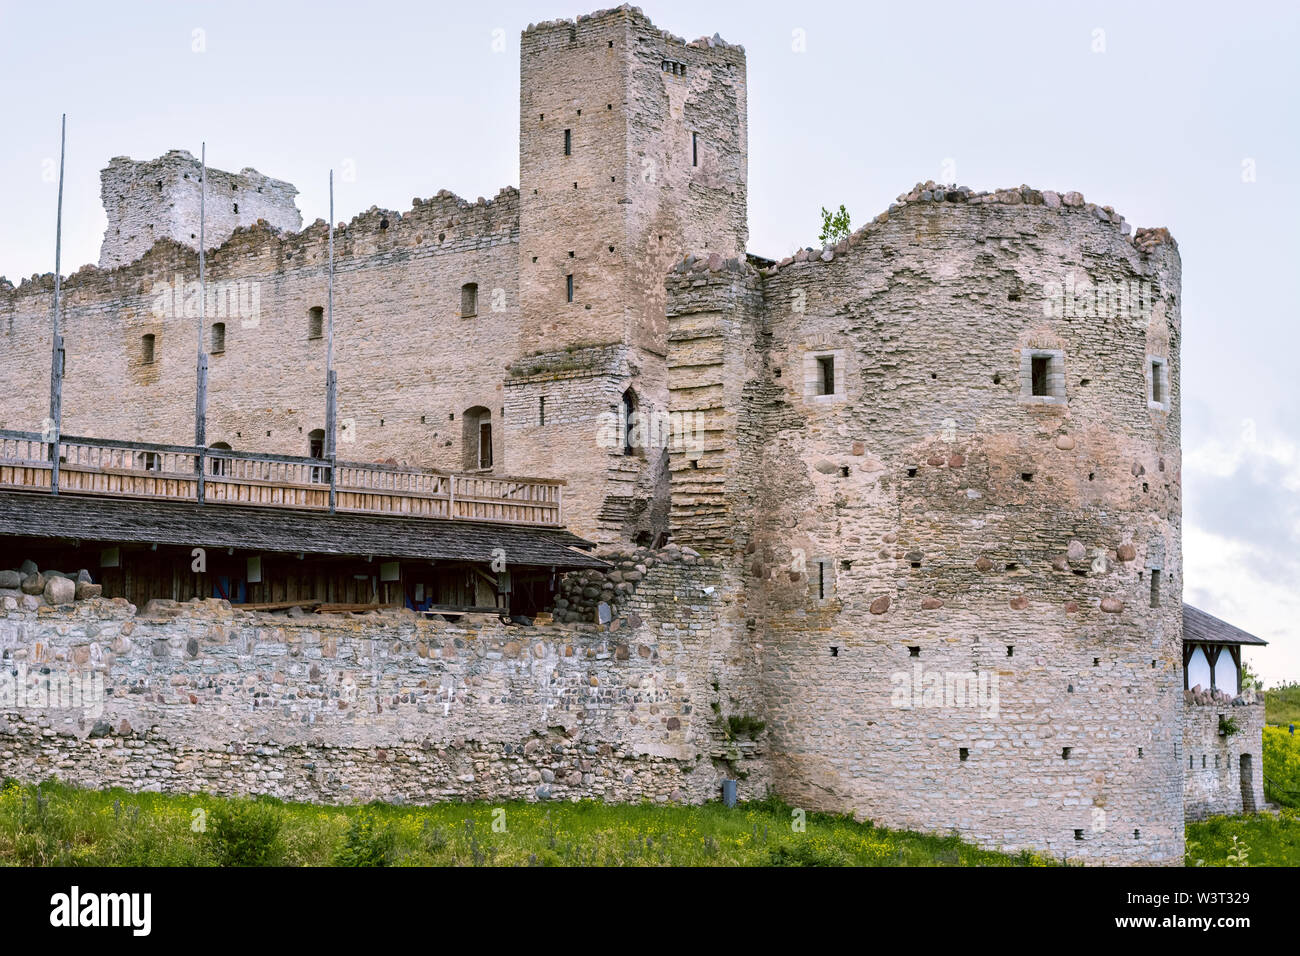 The ruins of the fortress bastion of the old castle against the gray sky. Stock Photo